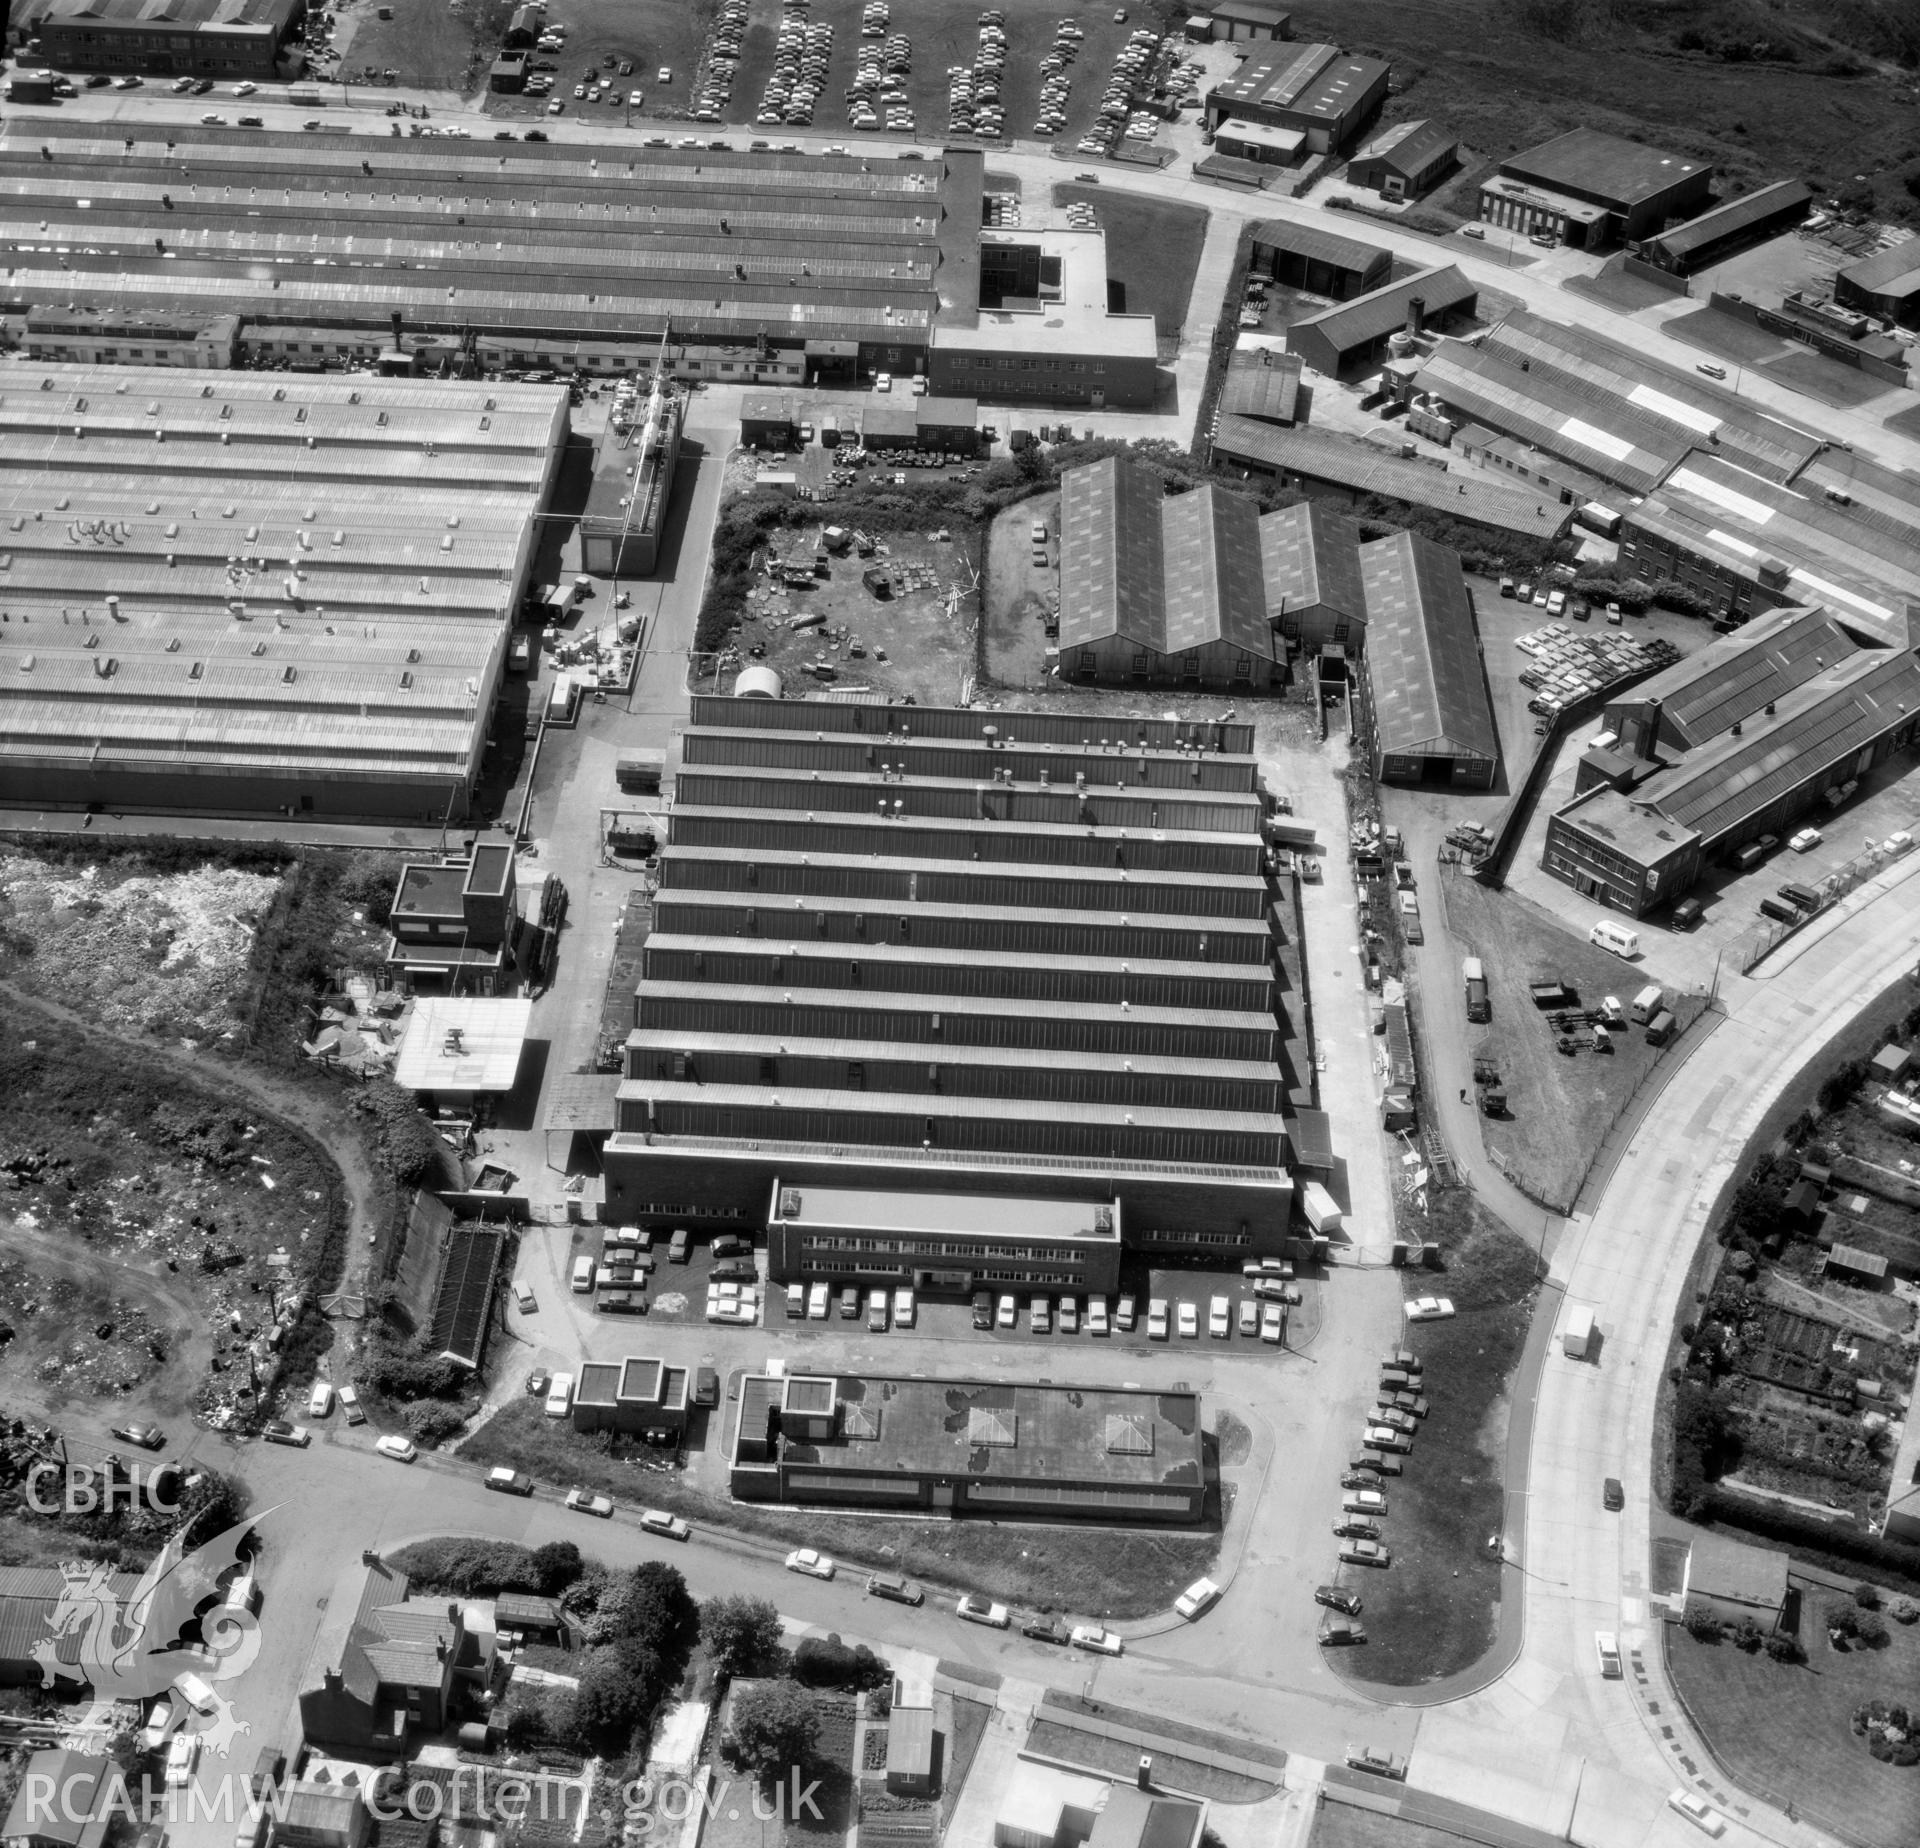 Black and white oblique aerial photograph showing the Mettoy Factory, Fforest Fach Industrial Estate, from Aerofilms album no. W.30, taken by Aerofilms Ltd. and dated 22/6/1972.